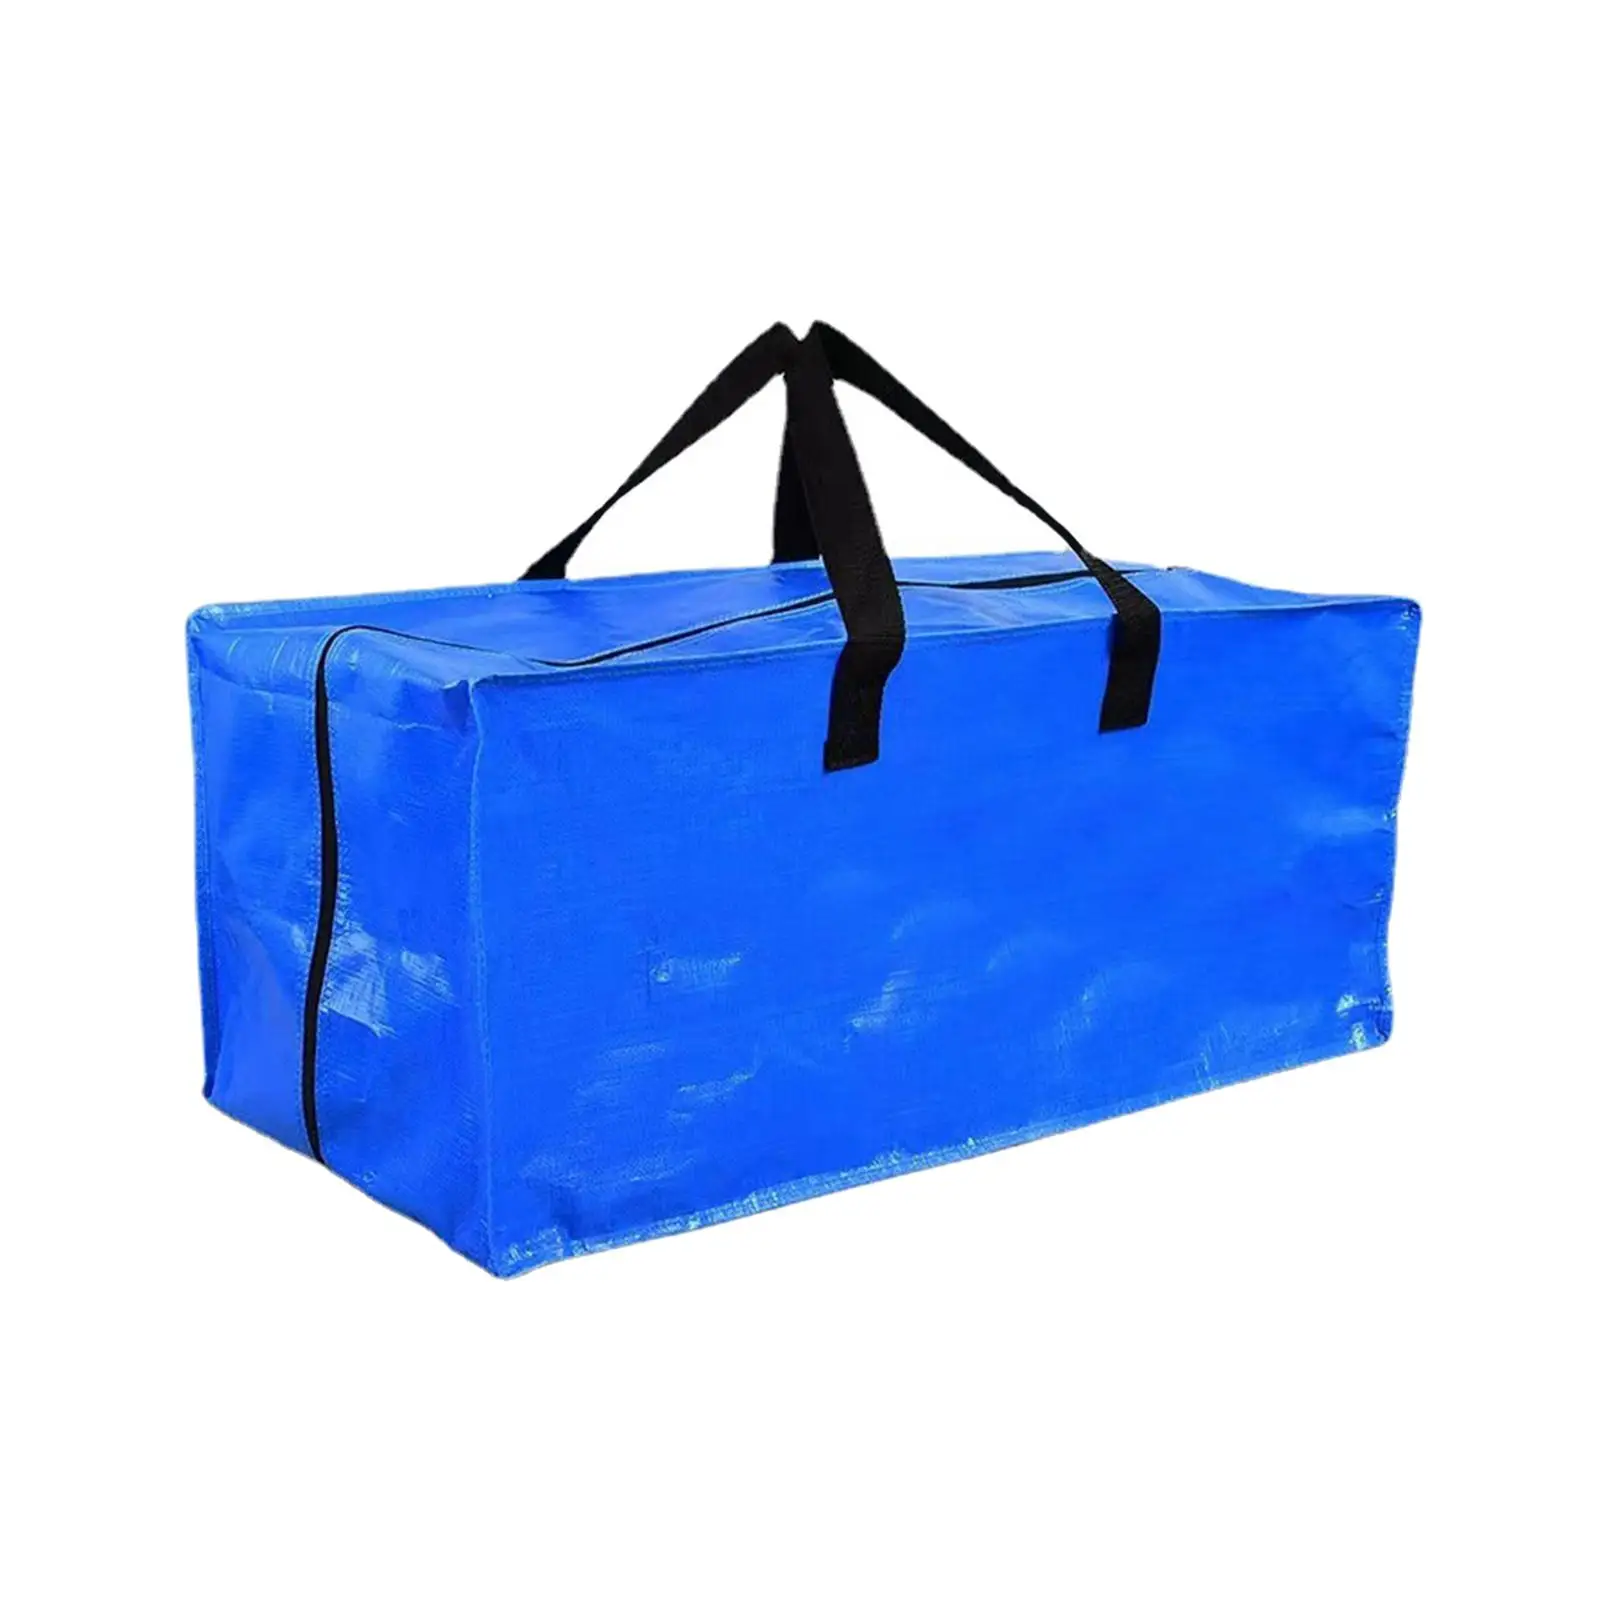 Large Moving Bags Reusable Household Organizer Storage Bags Space Saver Bags Strong Handles Packing Bags for Laundry Dorm Quilts